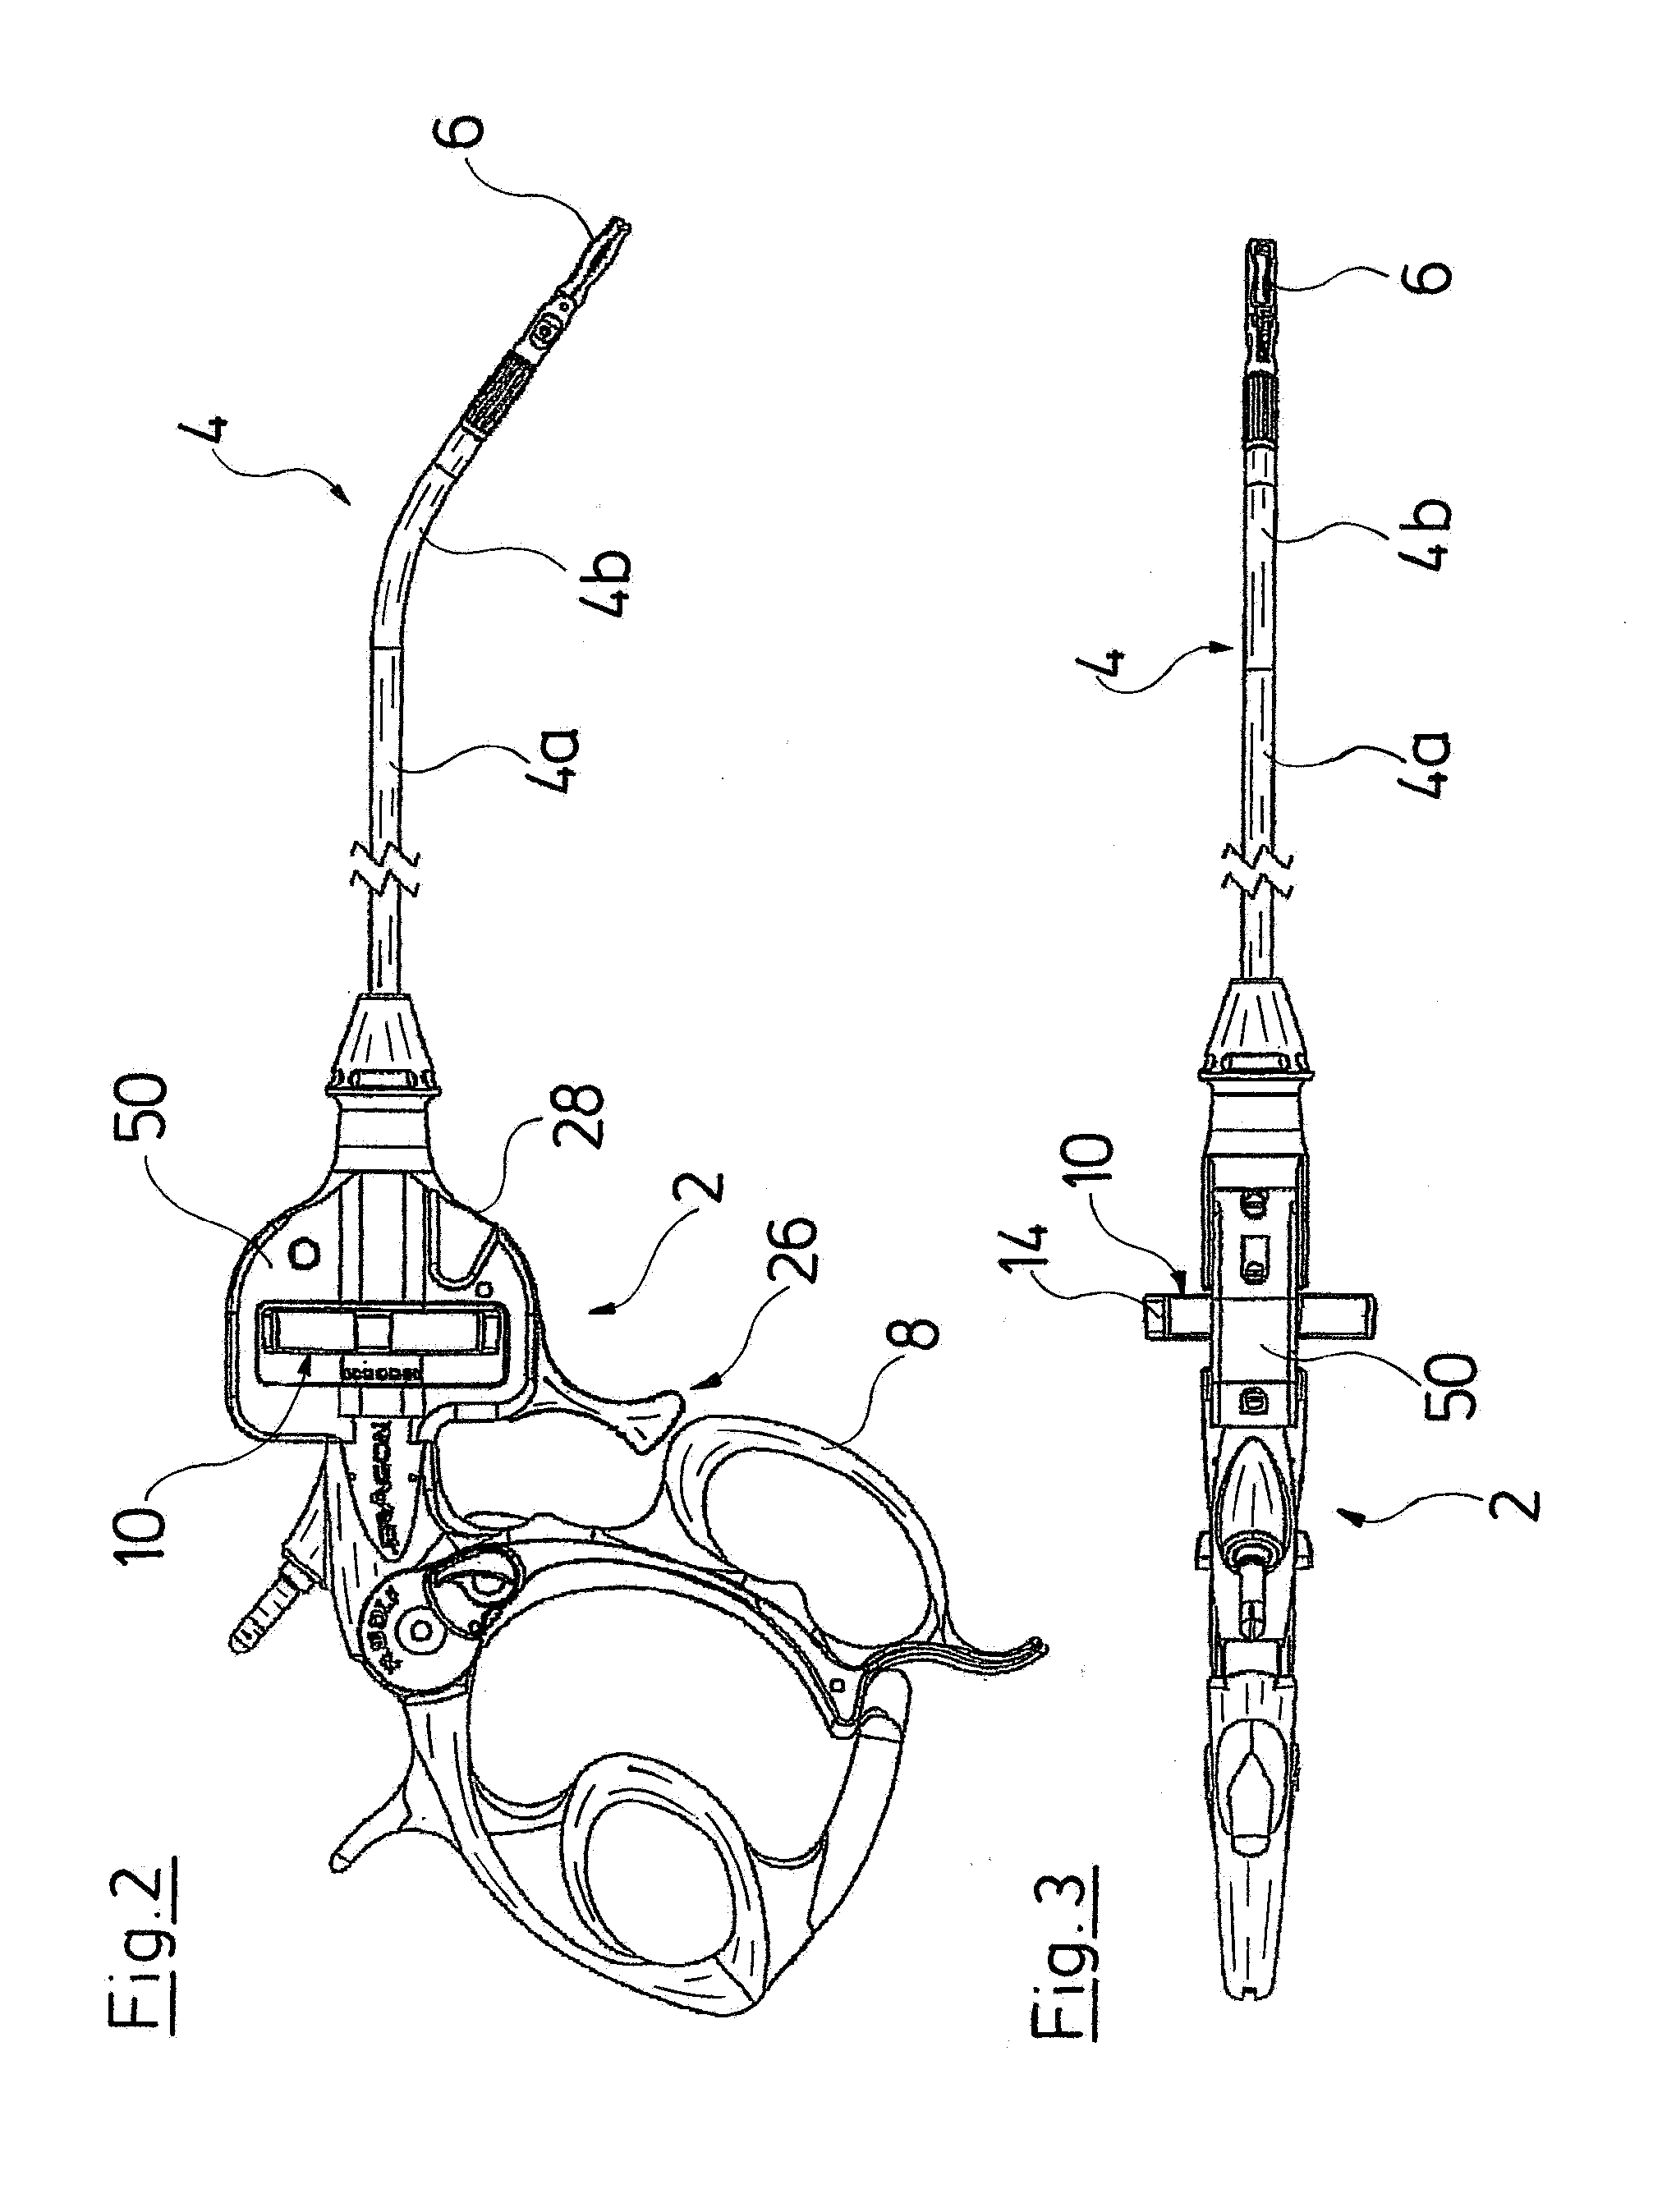 Handle for a medical instrument